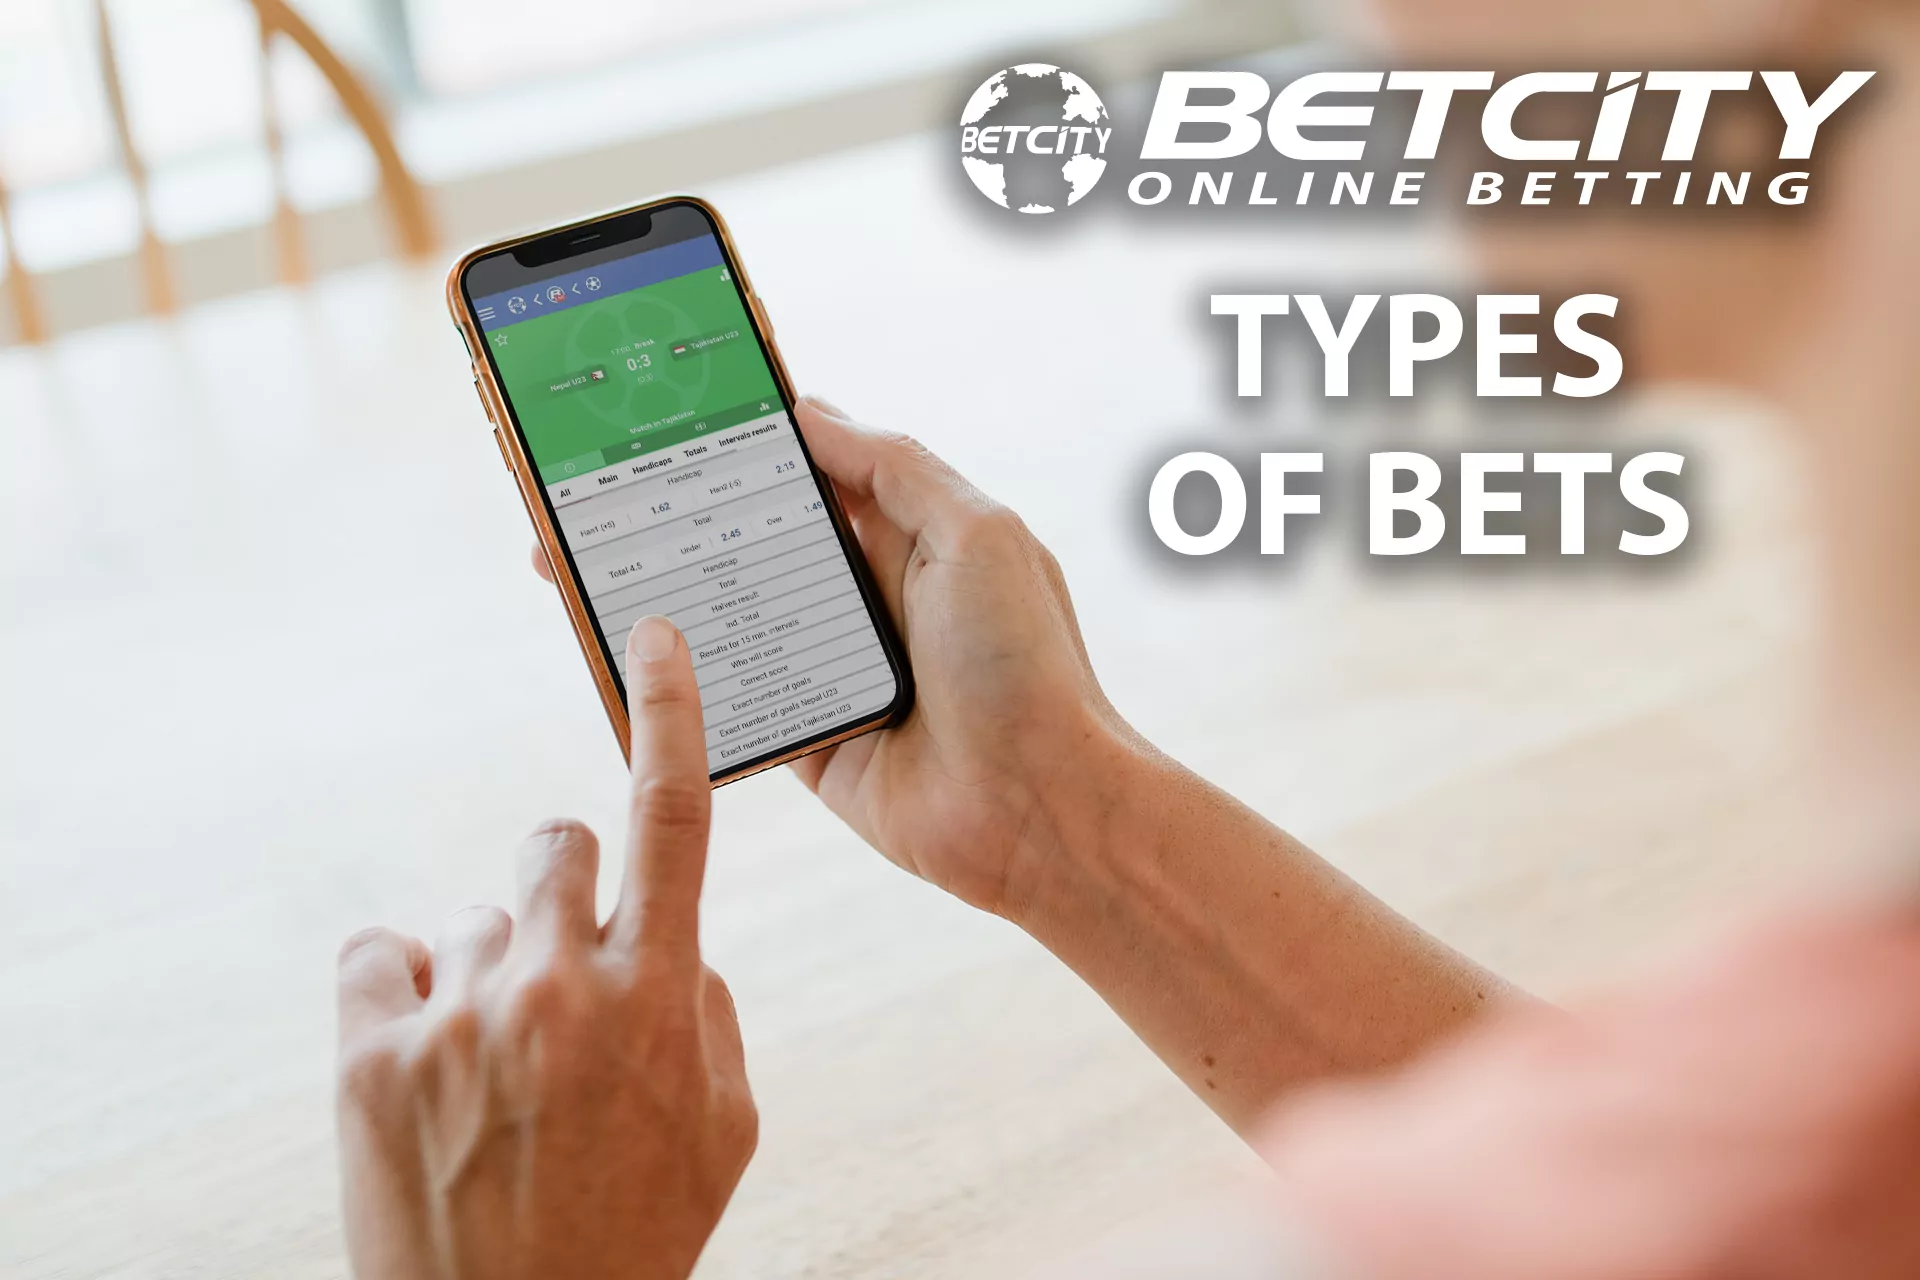 You can place all the popular types of bets in the Betcity app.